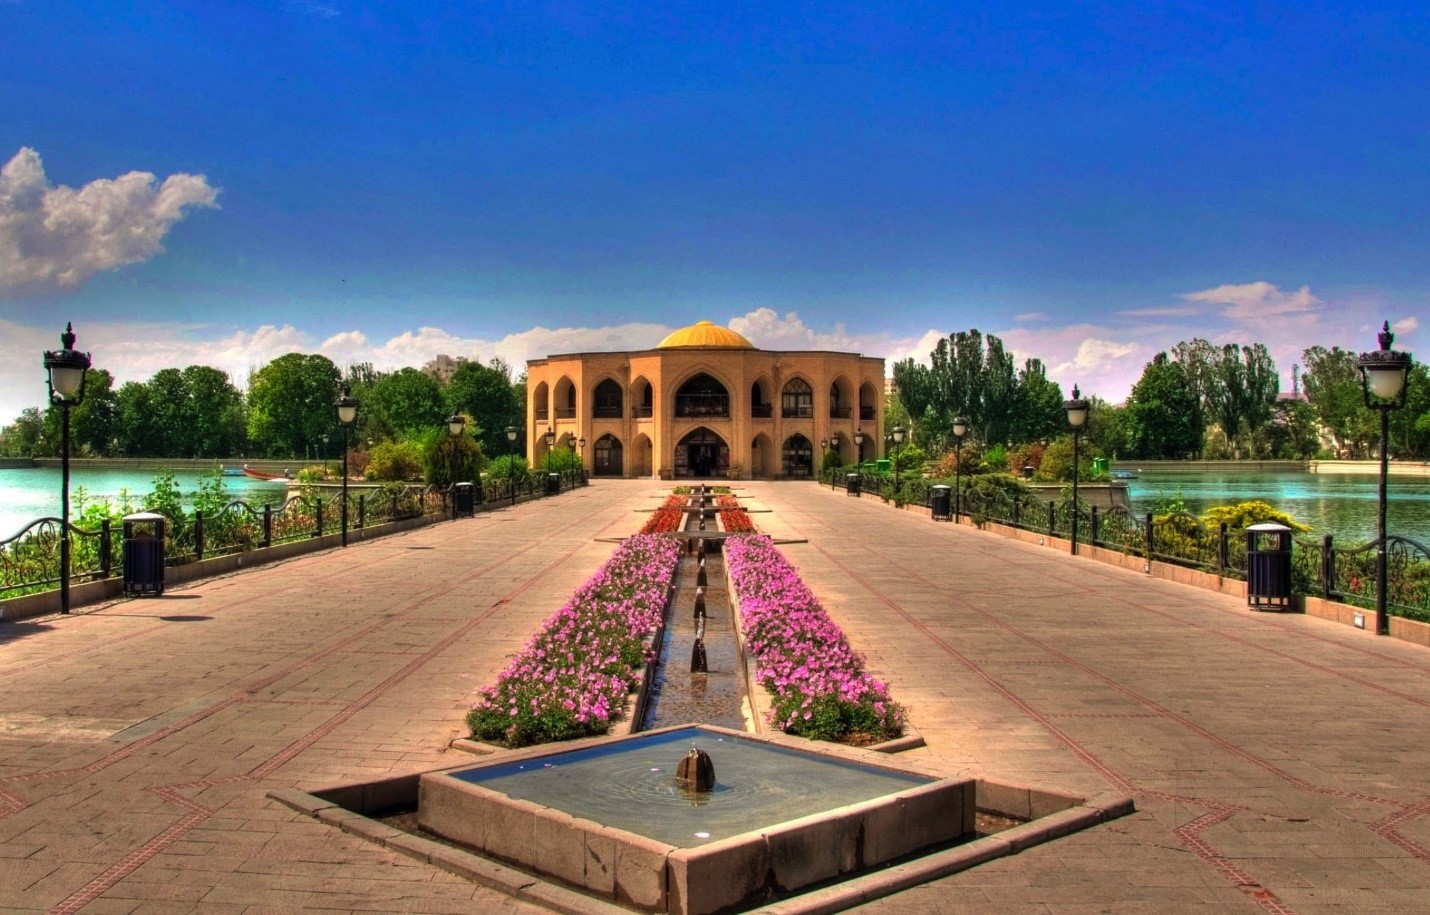 Iran, a country to visit